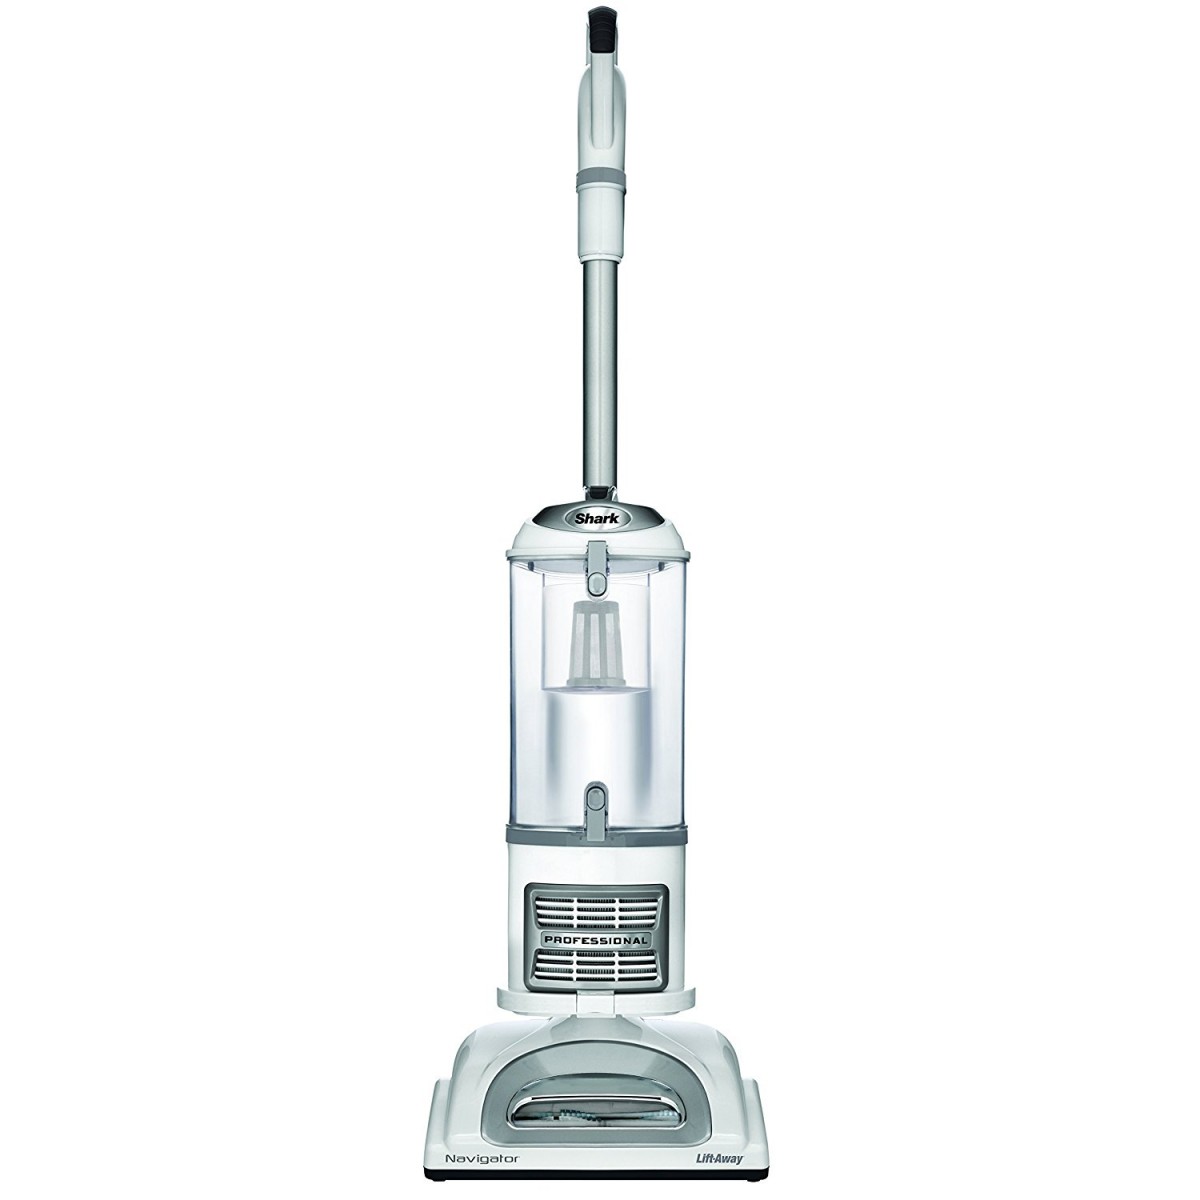 The Shark Navigator Lift-Away Vacuum Is on Sale for $150